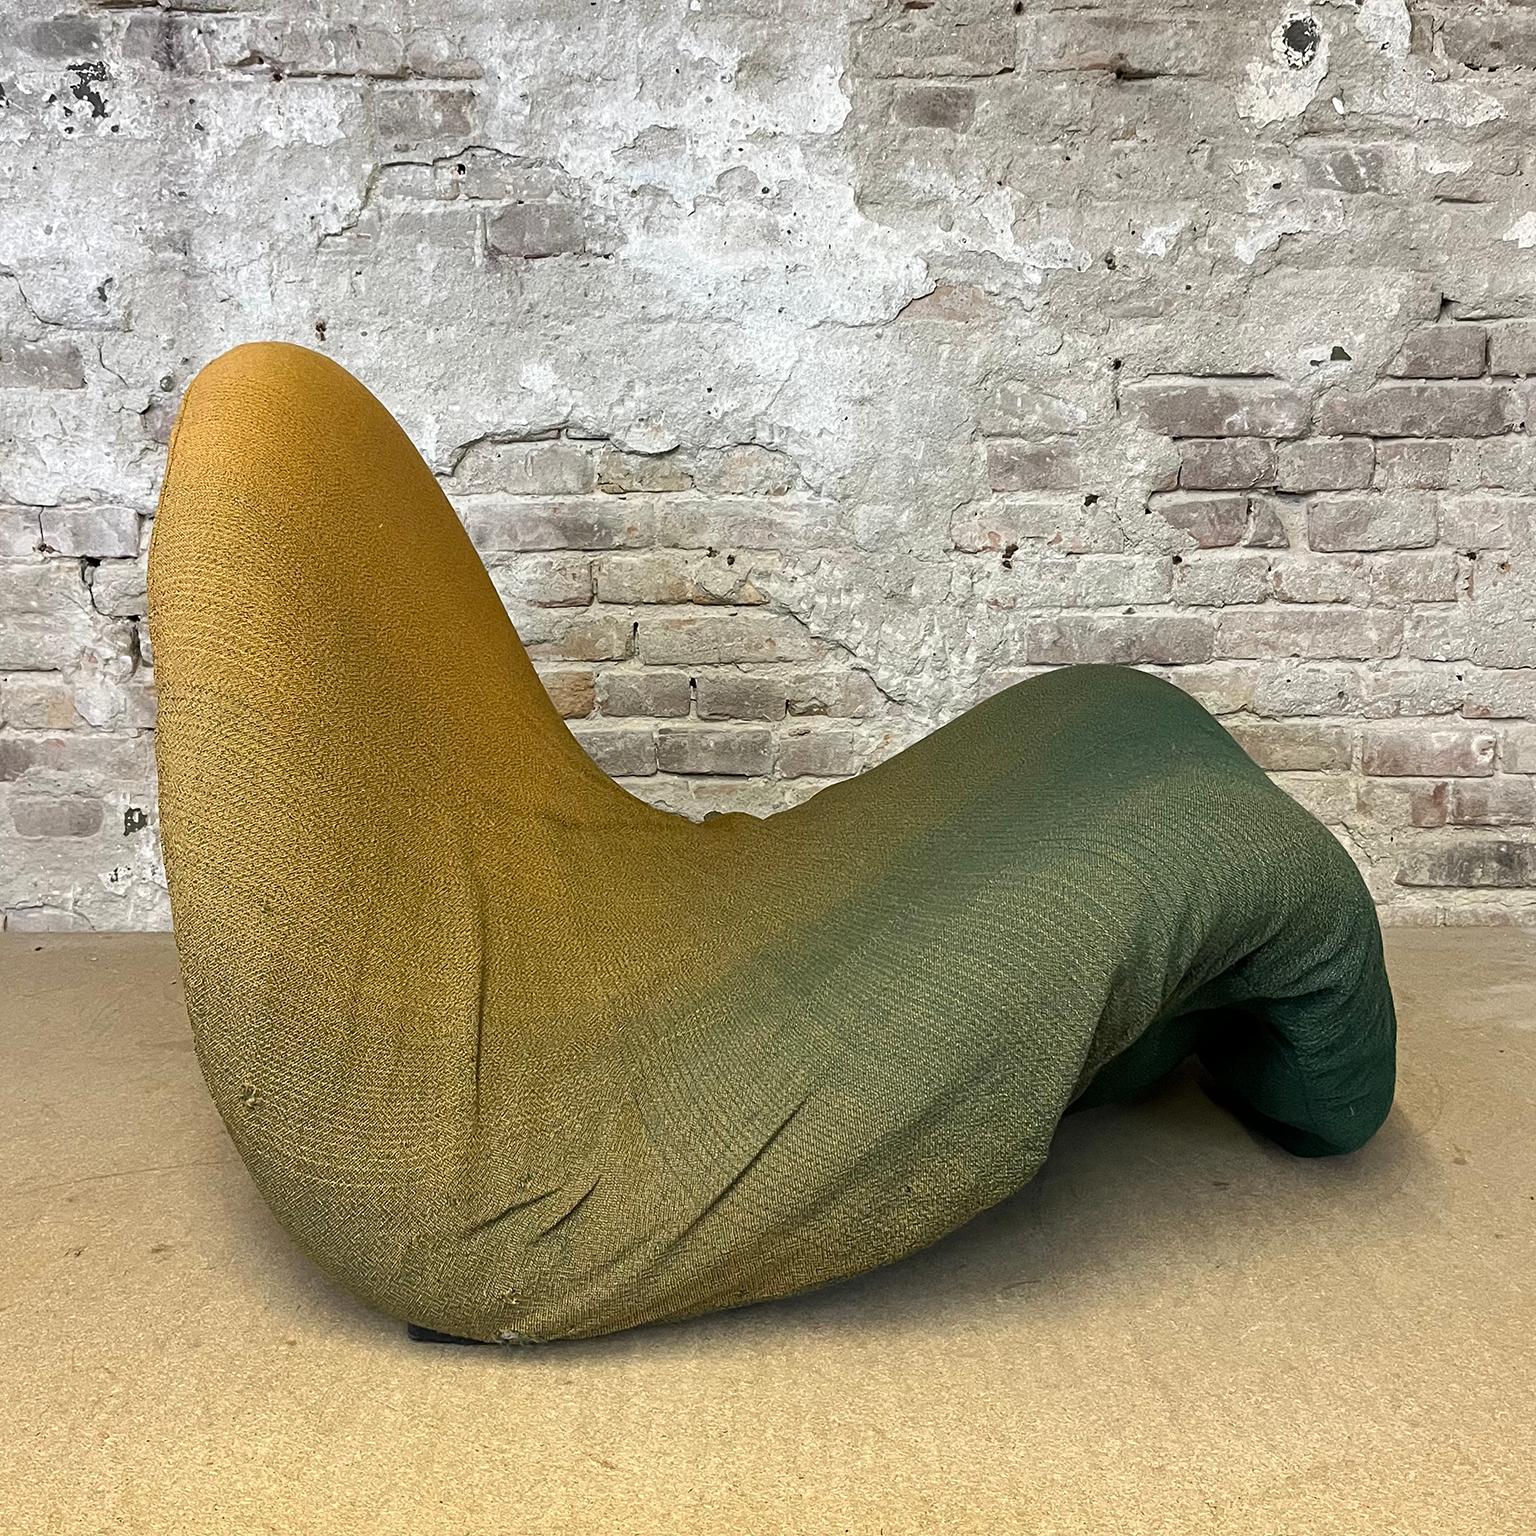 Iconic Lounge Chair by Pierre Paulin. The soft, streamlined form, shapely lines of this sculptural and comfortable Tongue chair, was designed in the 60s and produced by Artifort.

This piece has an orange green cover is somewhat loose. This